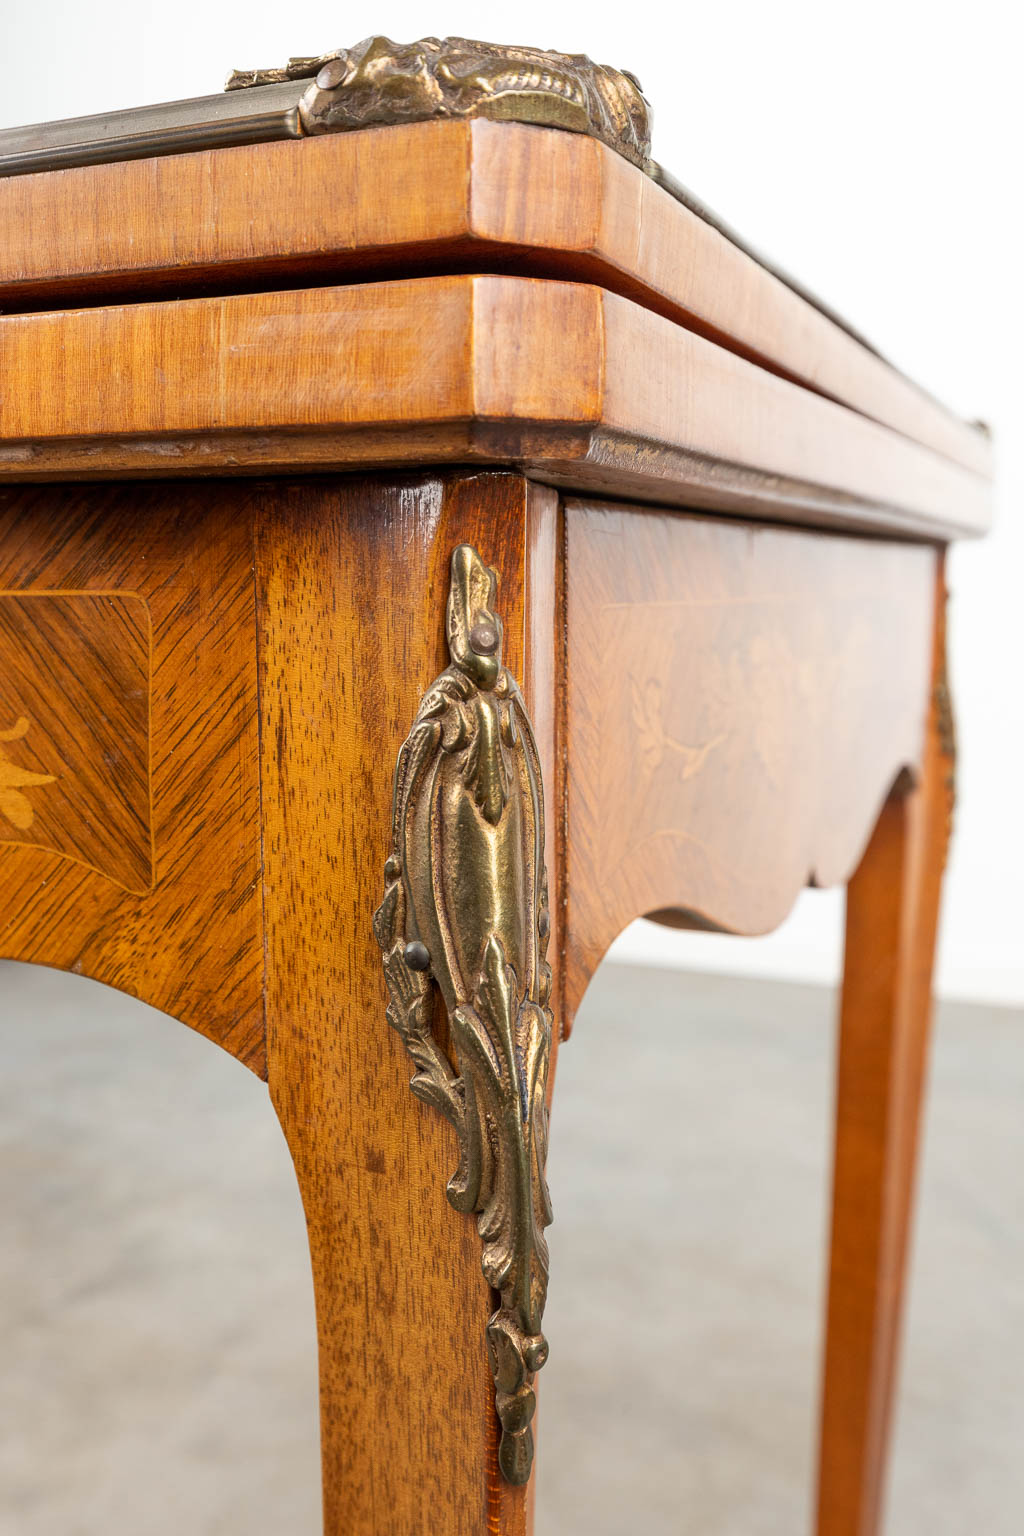 A game table finished with marquetry inlay in Louis XV style. (H:77cm)